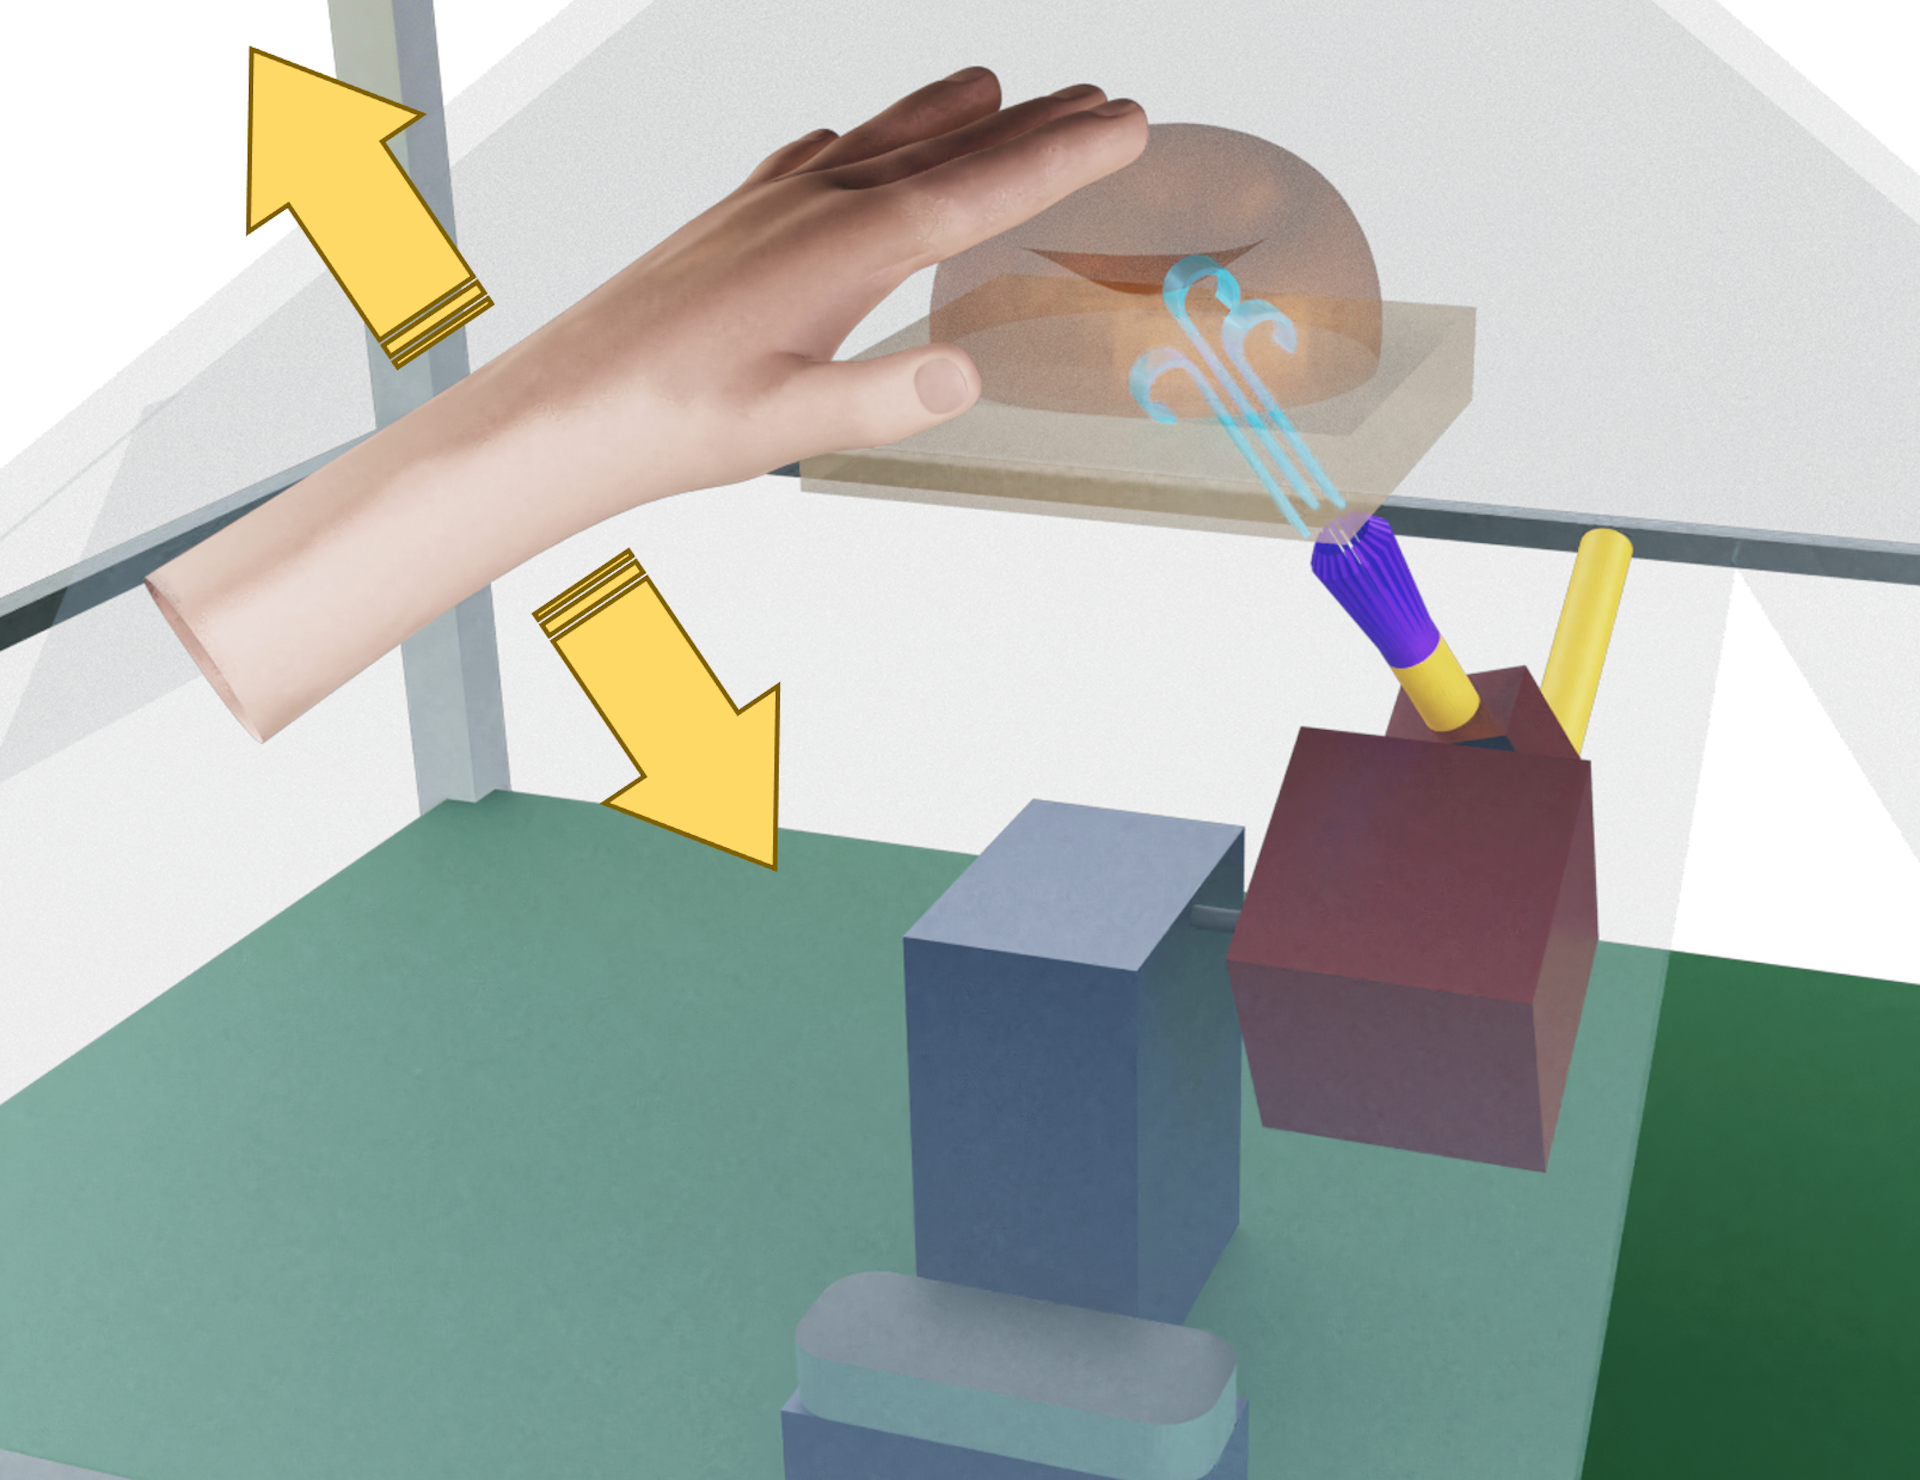 Diagram of the idea of touch with a hologram